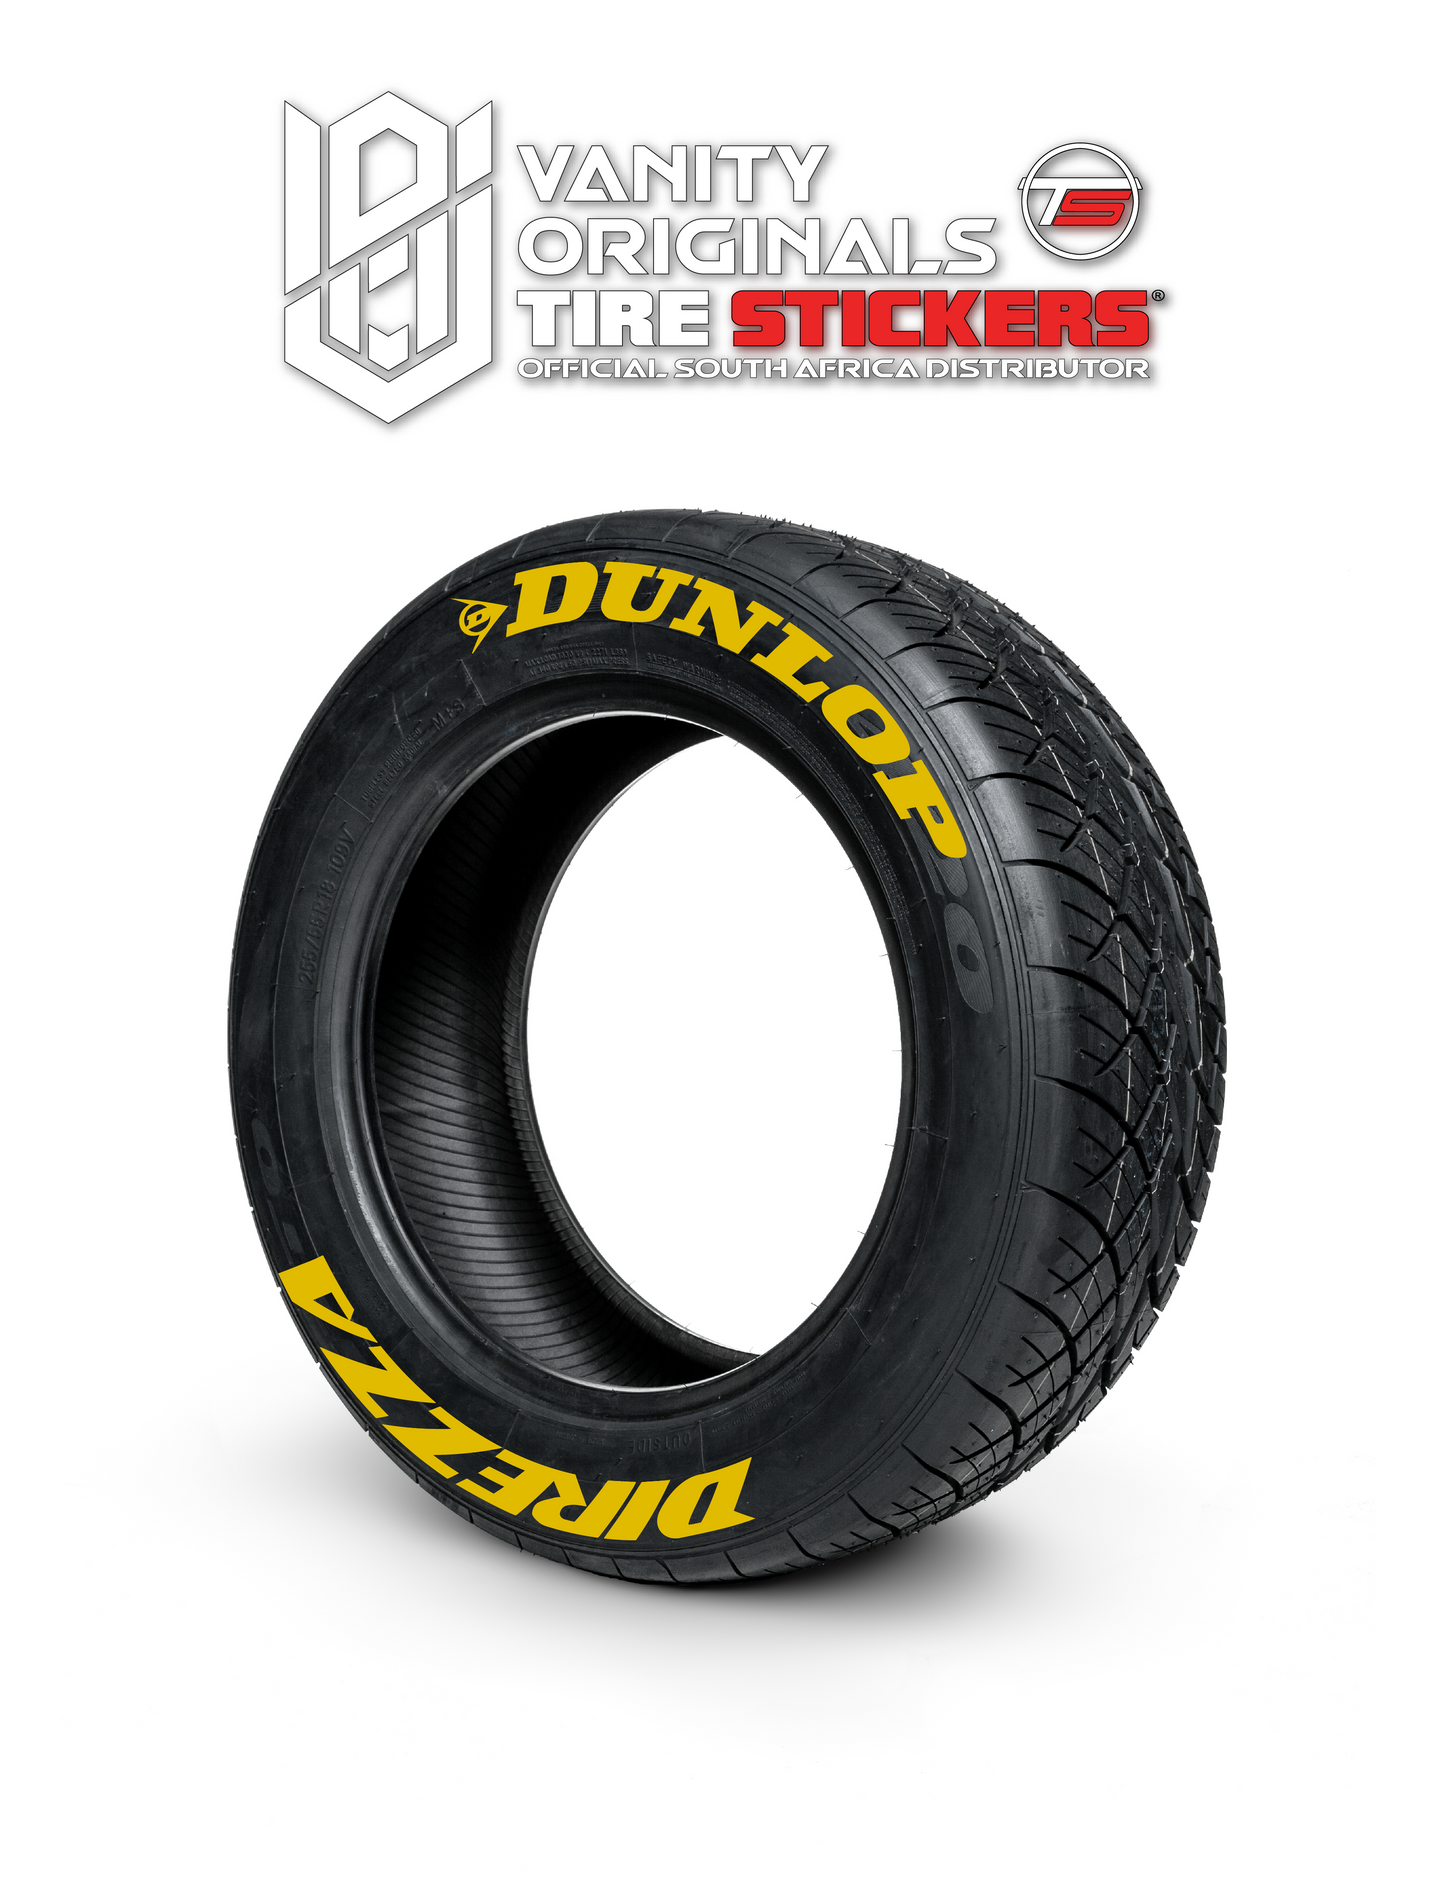 Dunlop Direzza ( 8x Rubber Decals, Adhesive & Instructions Included )